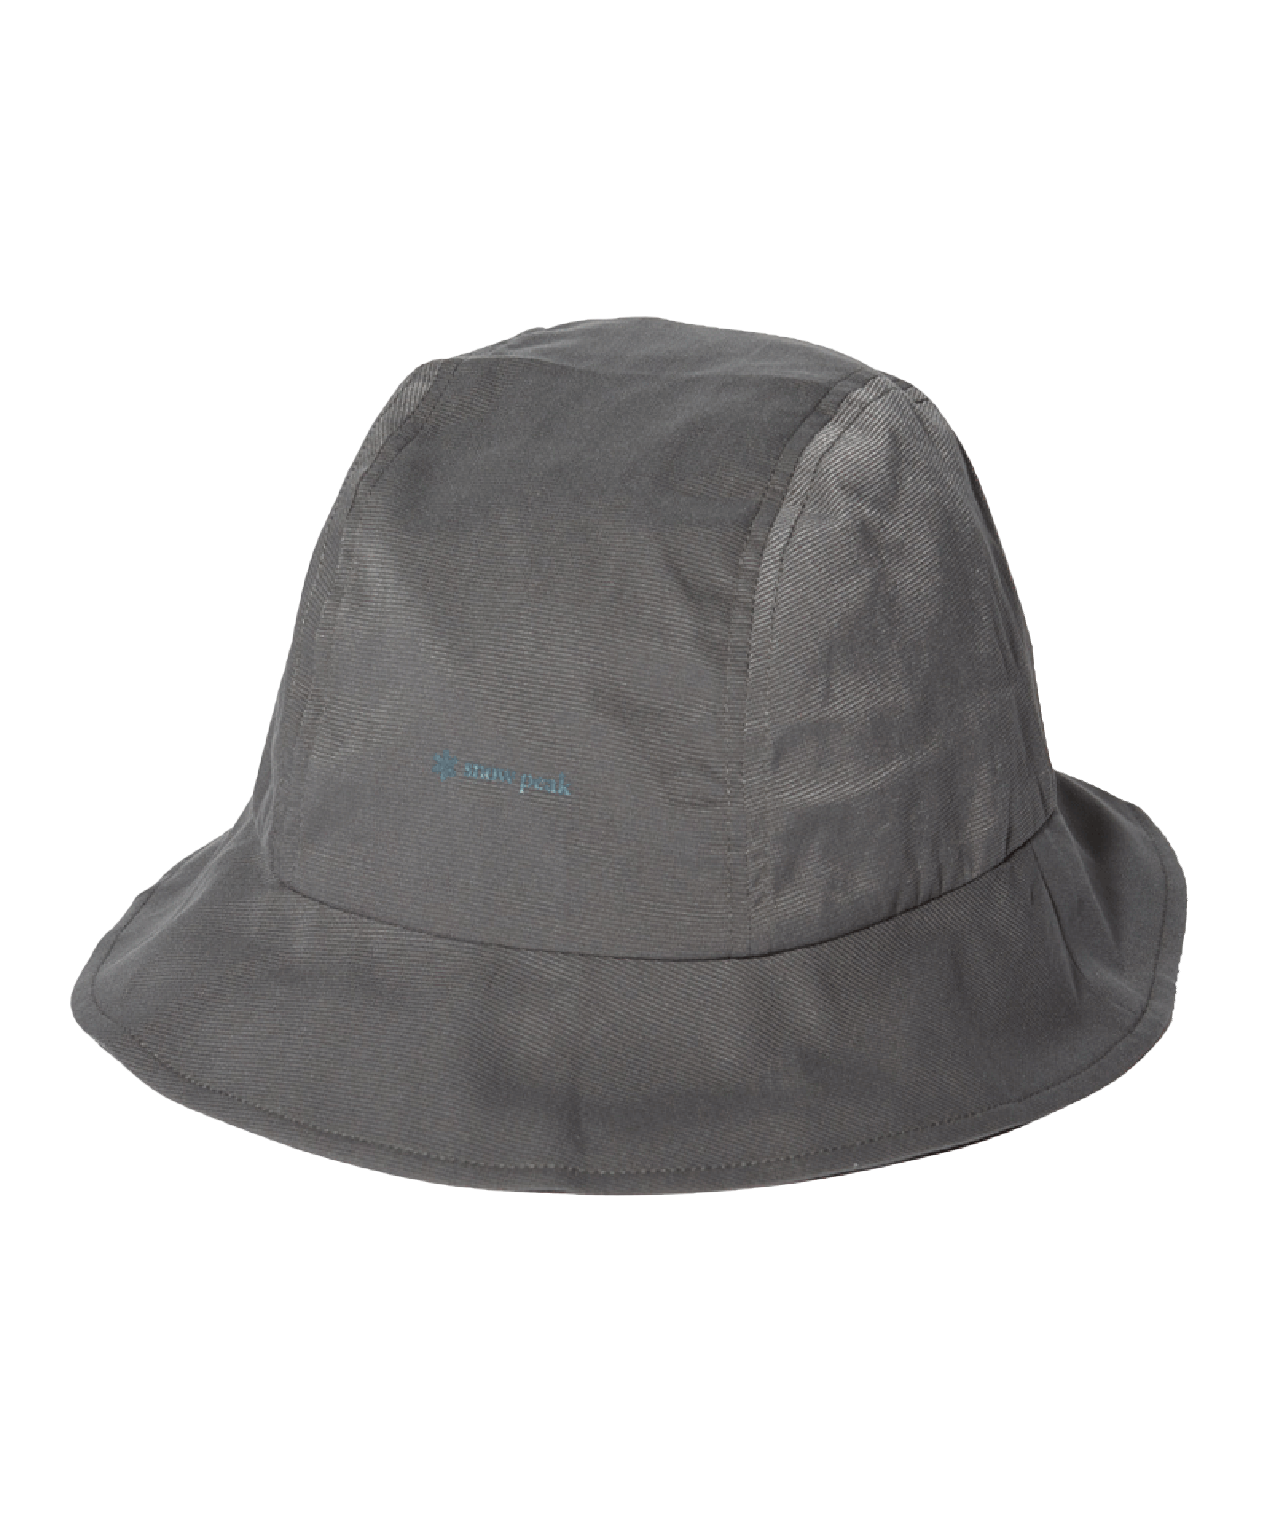 Snow Peak Crinkled-Shell Bucket Hat - Gray - One Size